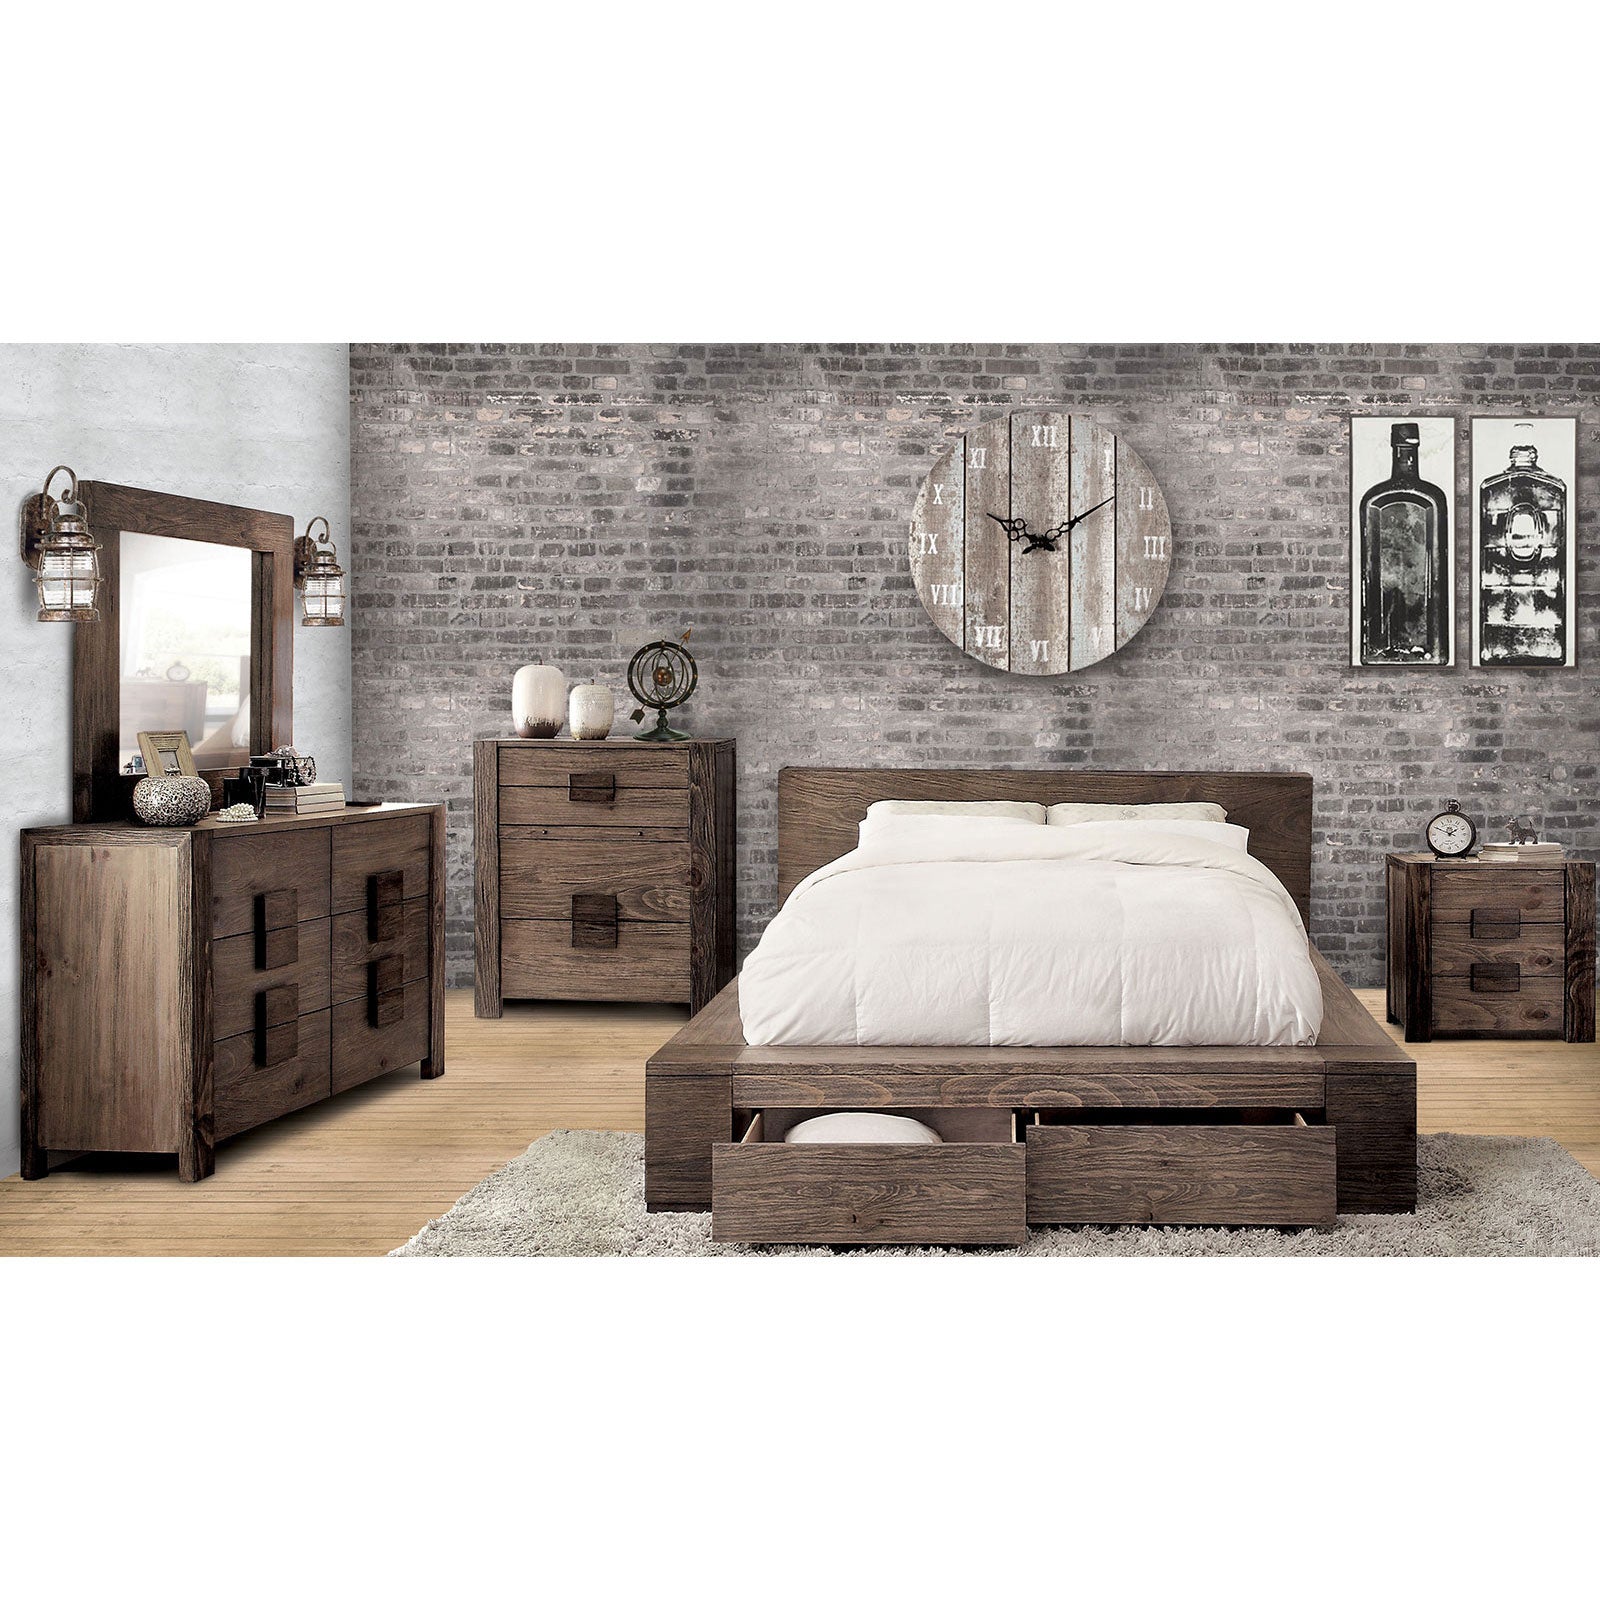 JANEIRO Rustic Natural Tone 5 Pc. Queen Bedroom Set w/ Chest